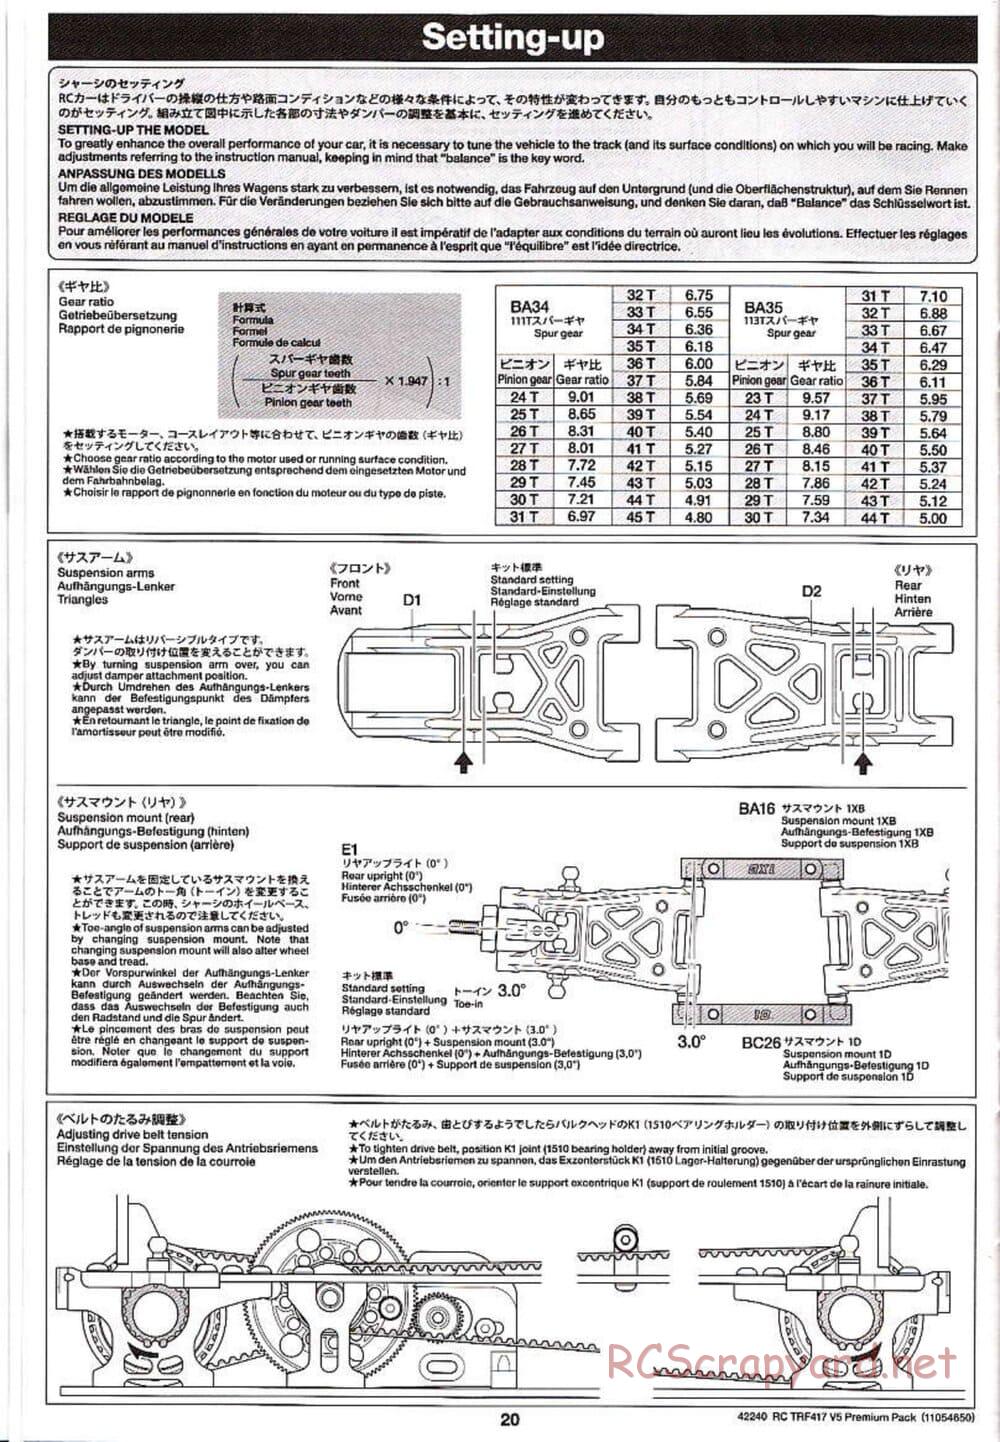 Tamiya - TRF417 V5 Premium Package Chassis - Manual - Page 20